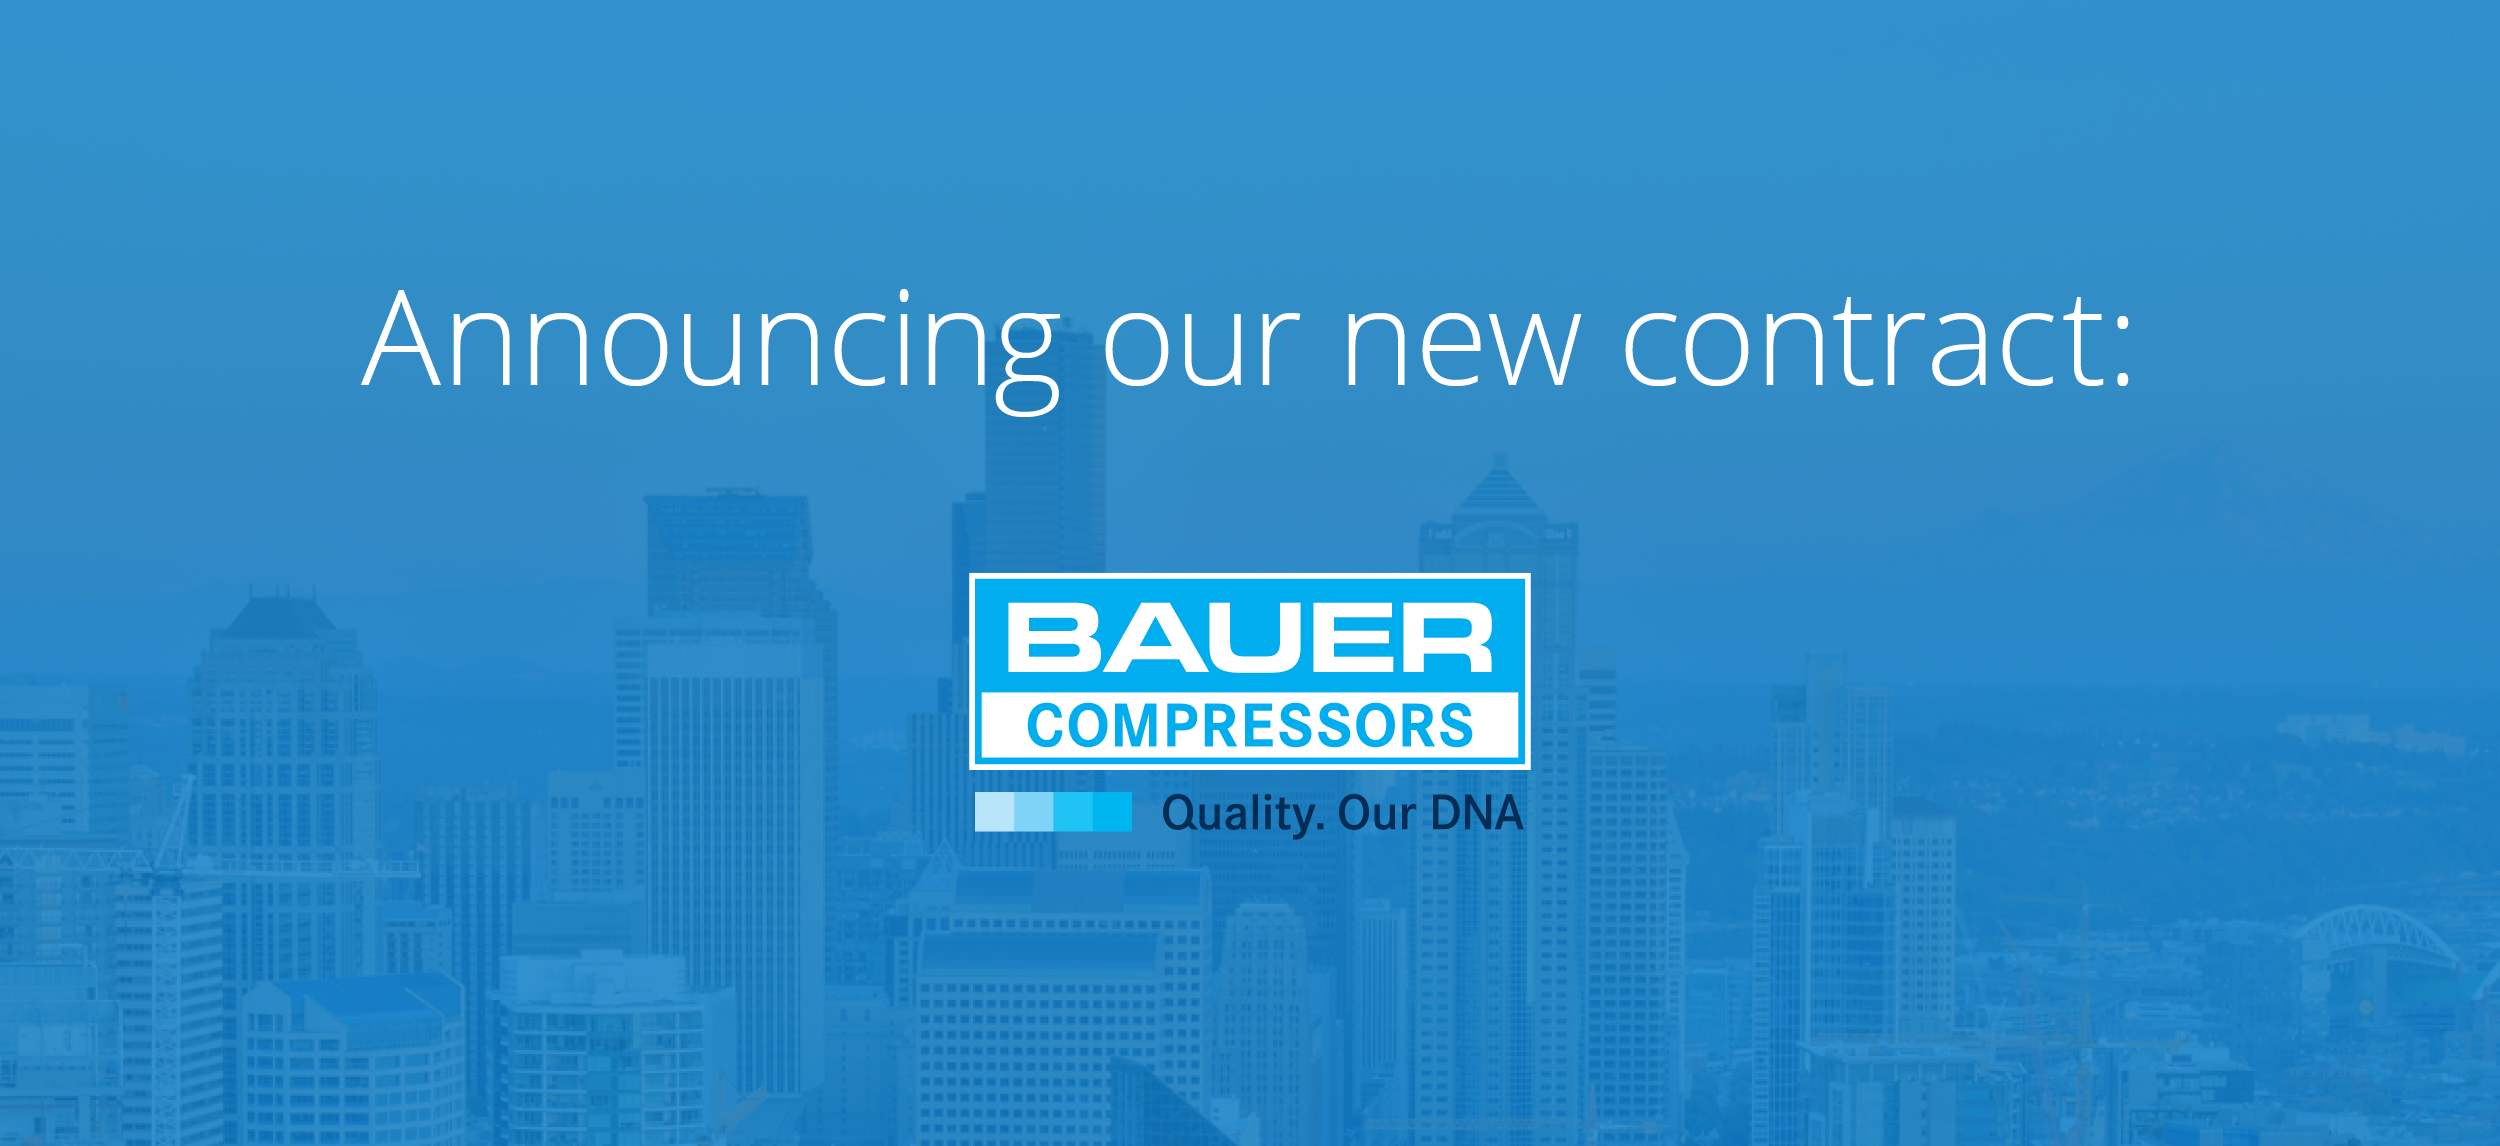 Announcing Bauer Compressors, Inc: Our Newest Contract